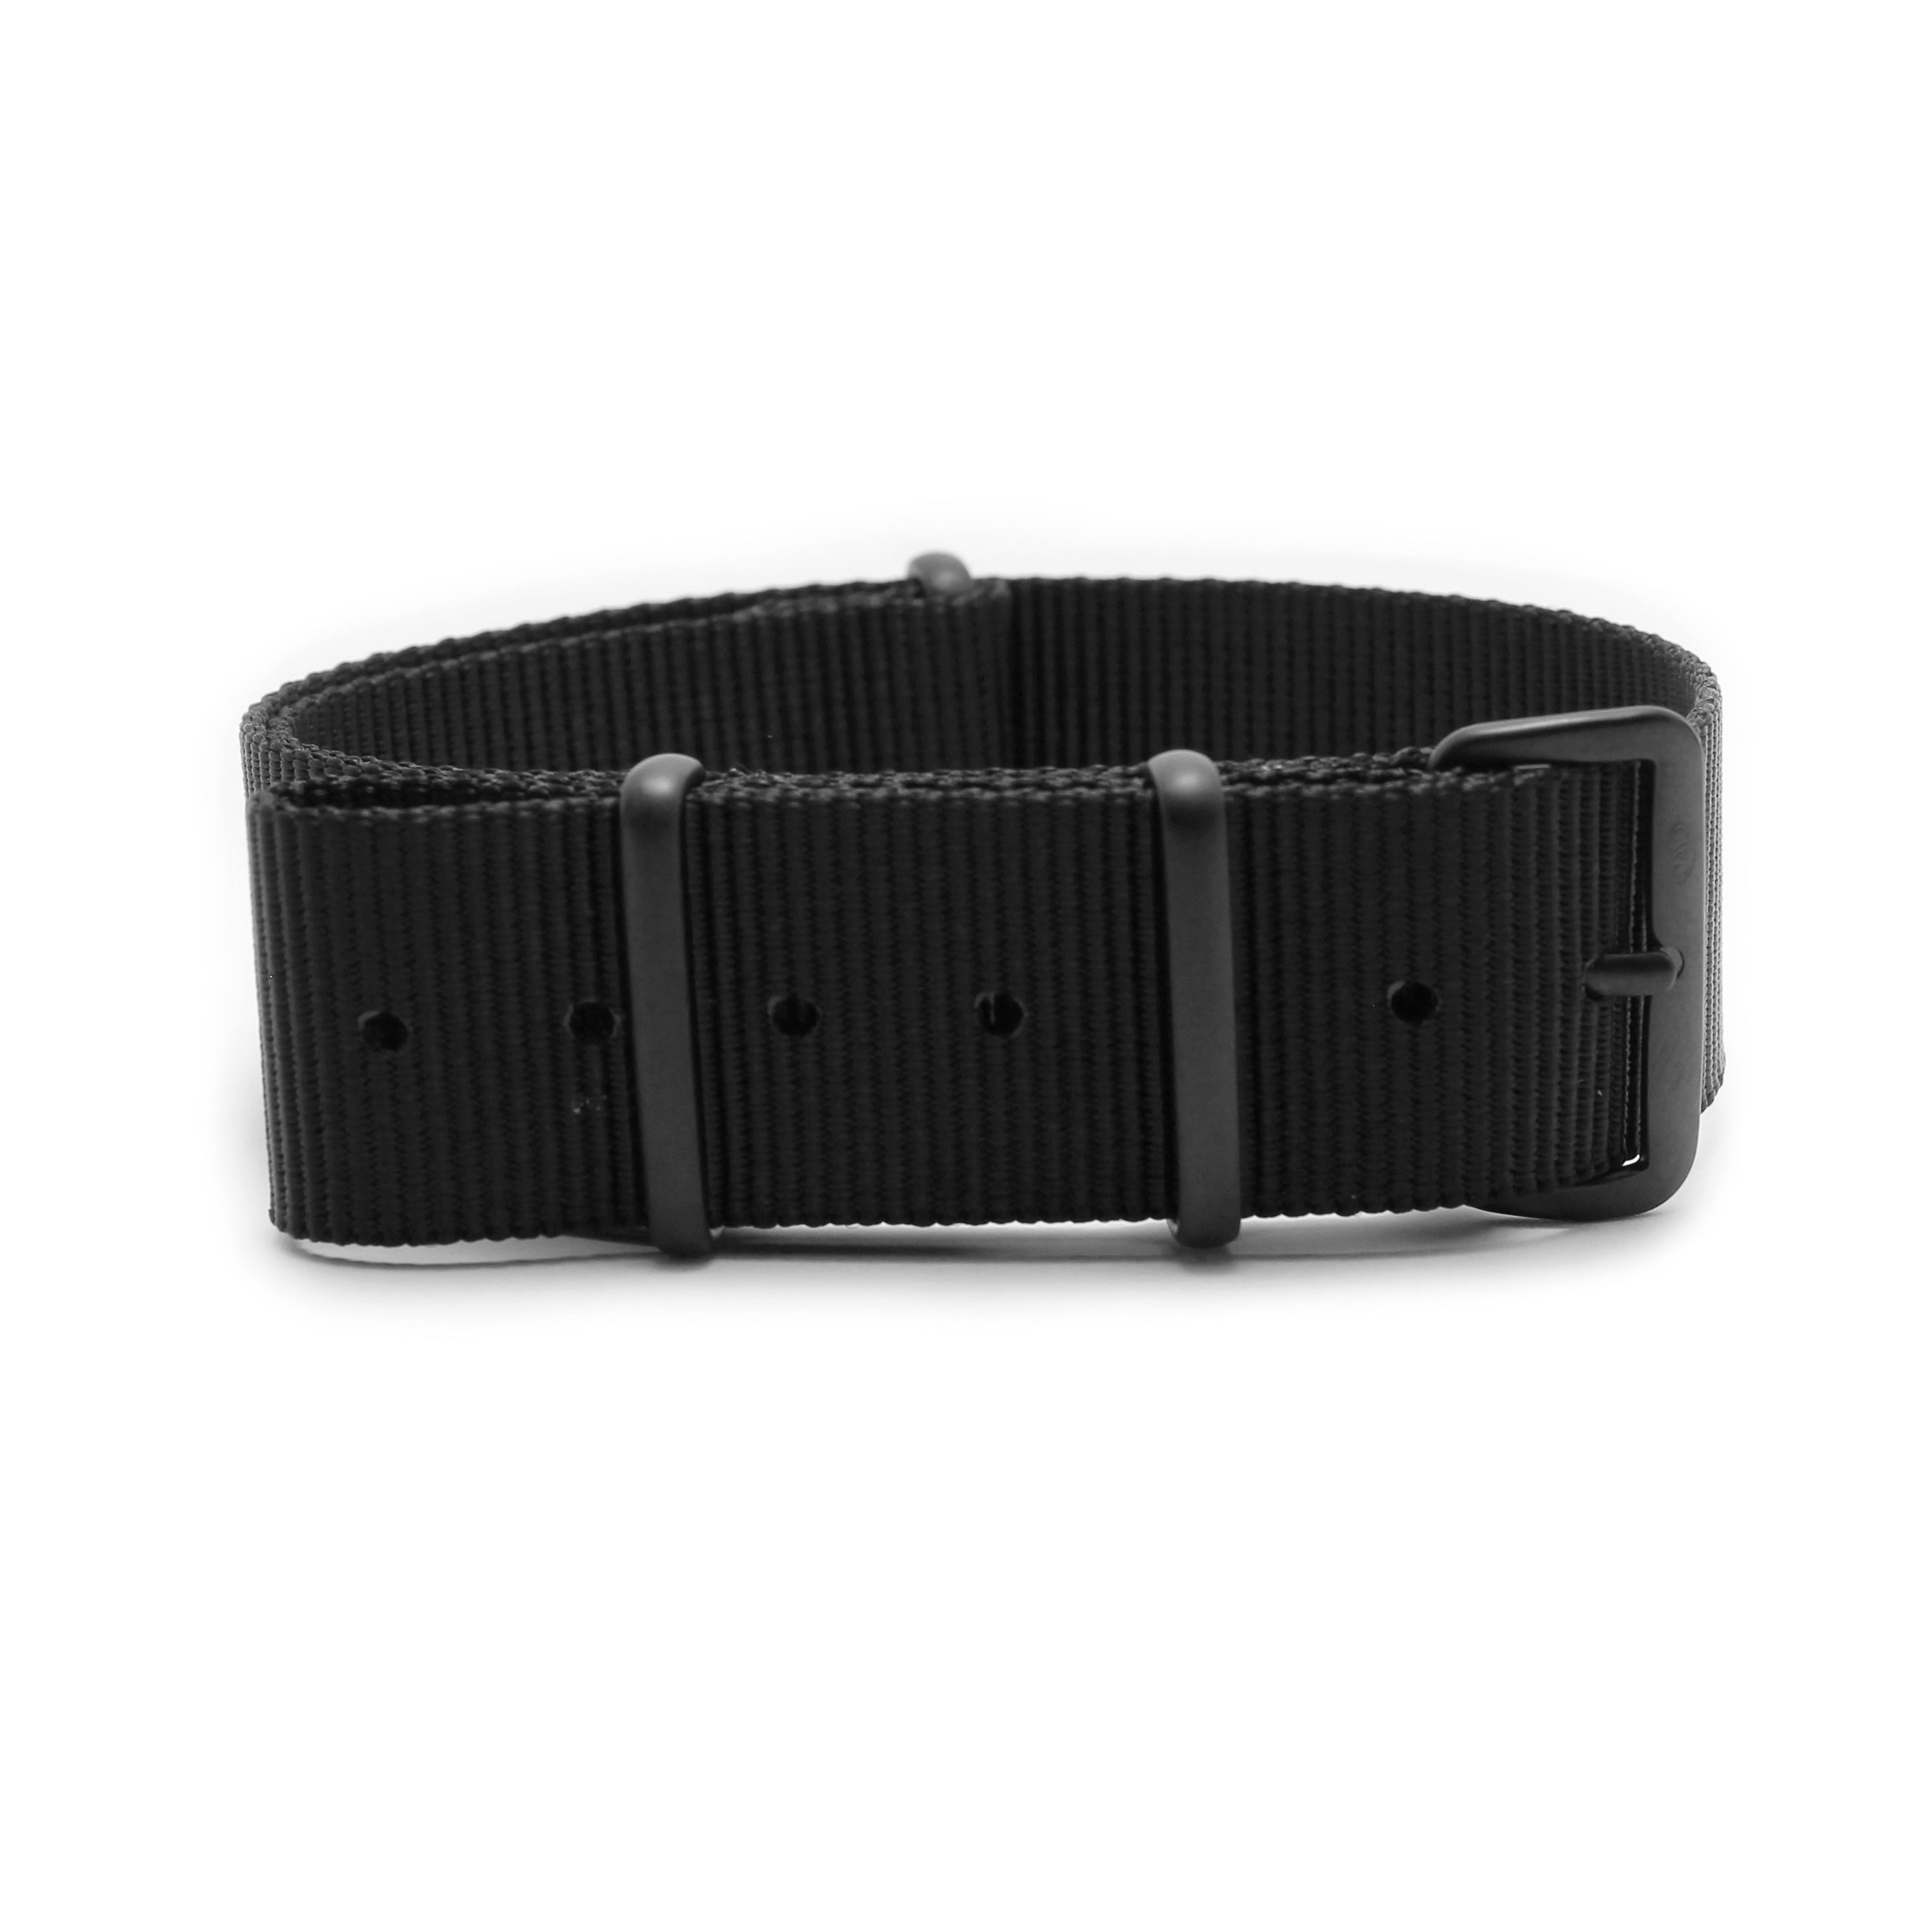 CABOT MILITARY WATCH STRAP - BLACK WITH MATTE BLACK BUCKLE